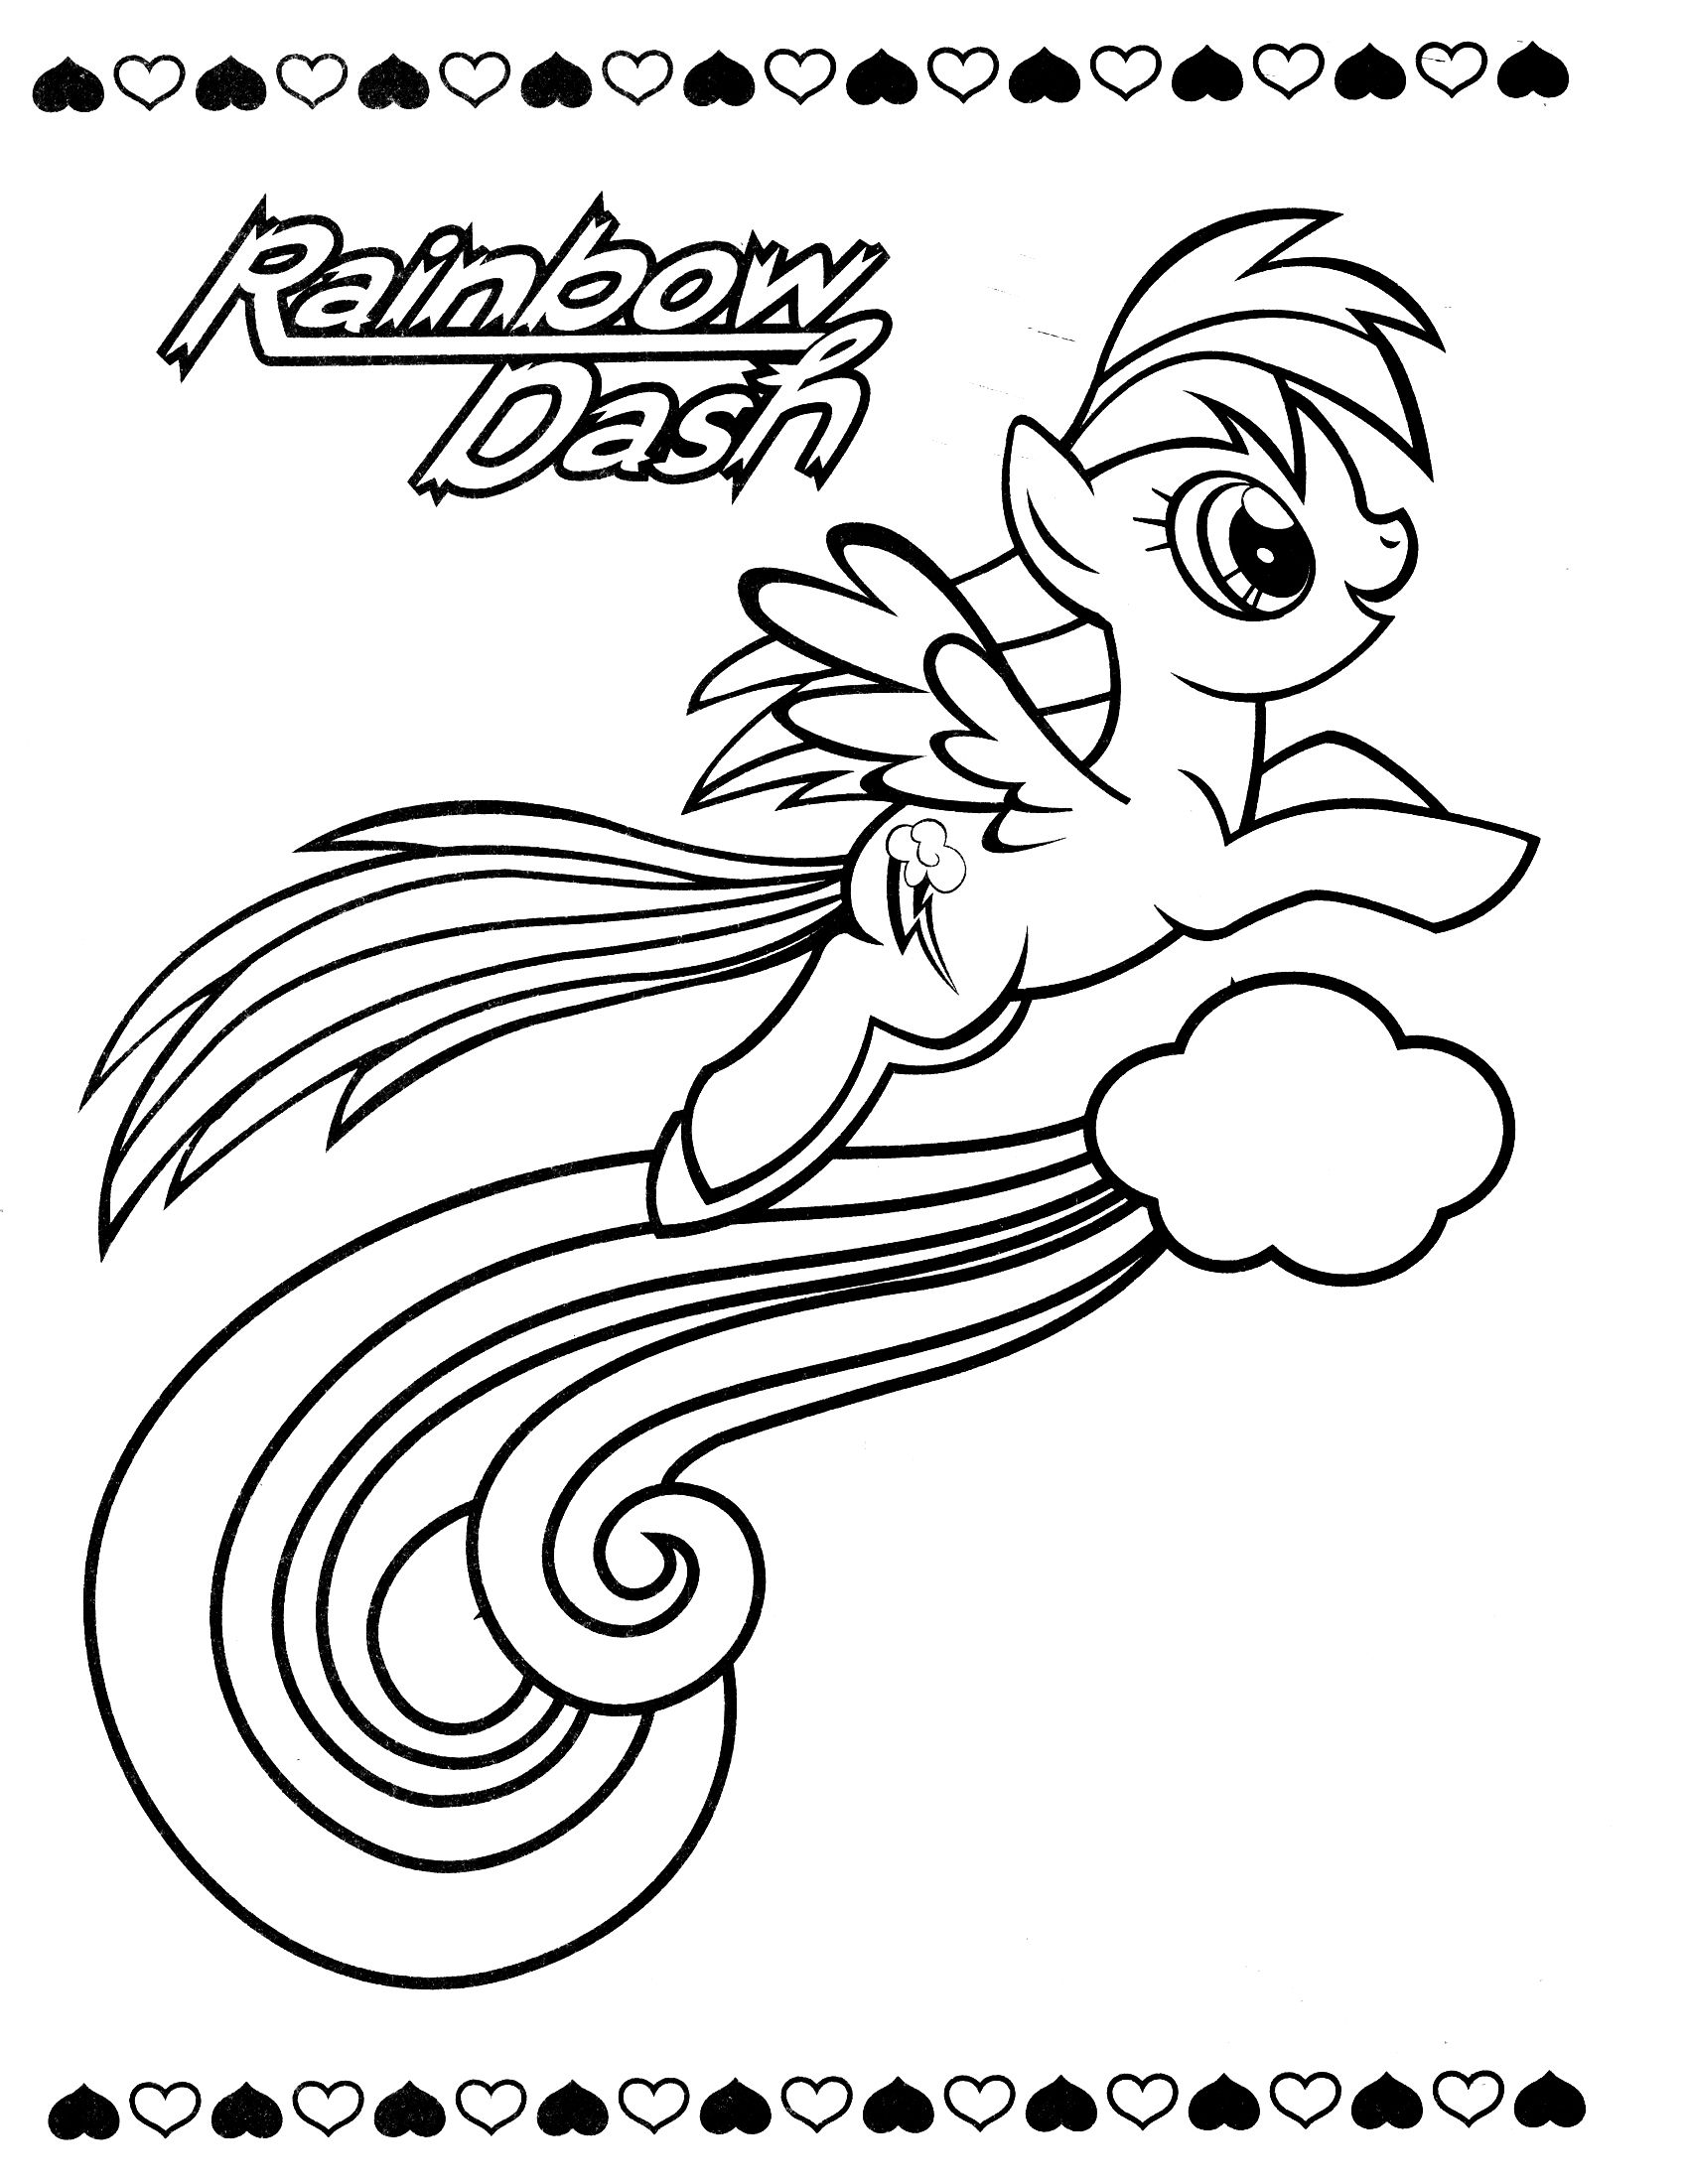 Flame heart Coloring Pages